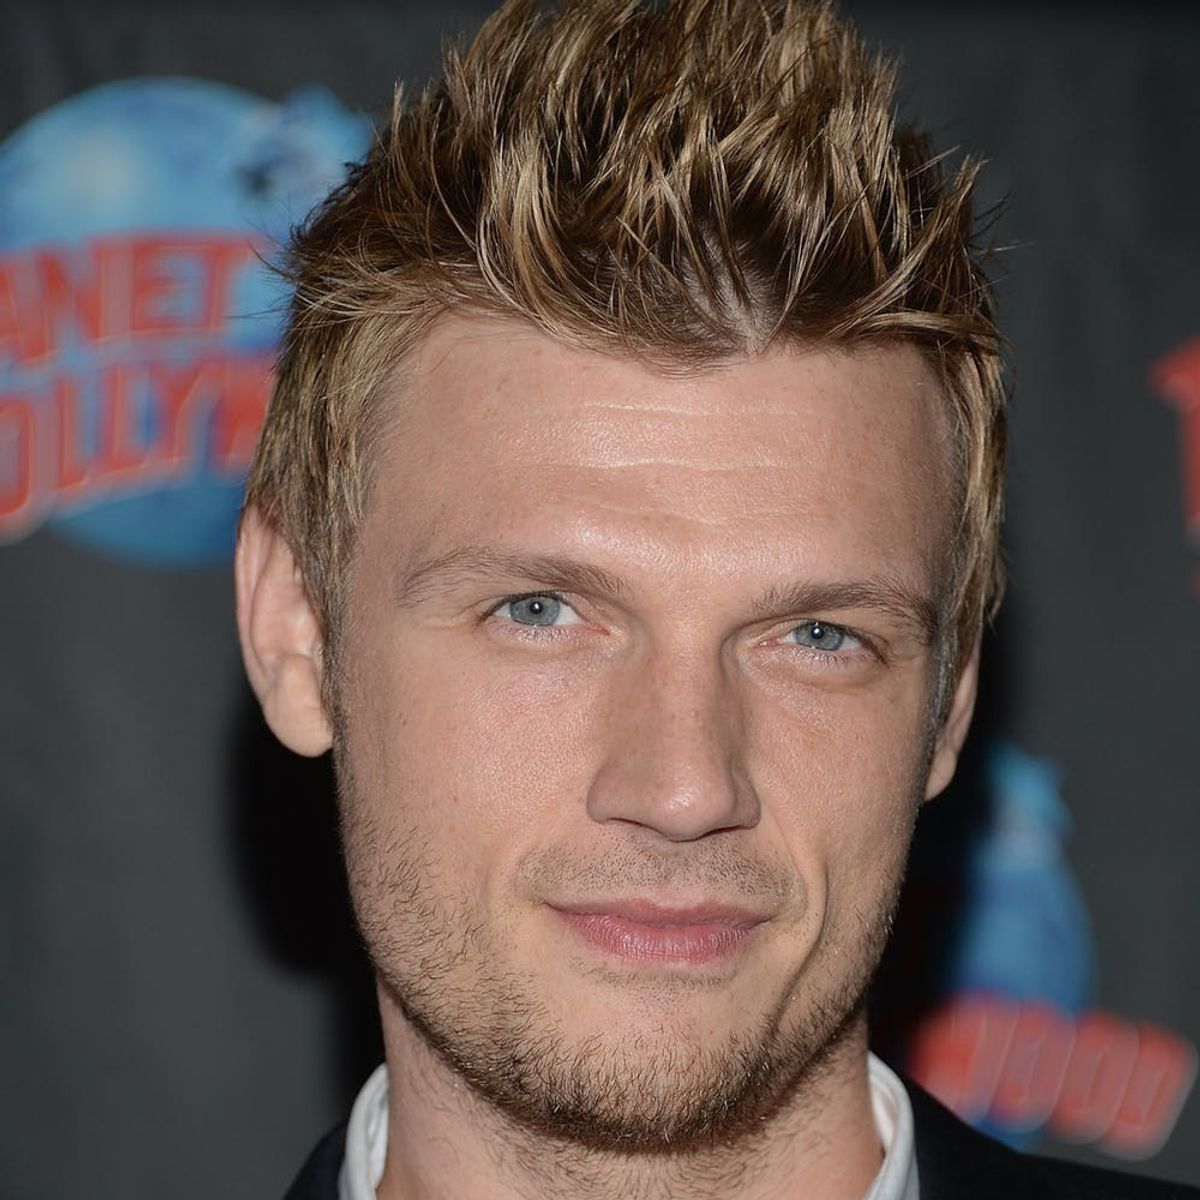 Nick Carter Shares His First Sweet Snap of Newborn Son Odin Reign